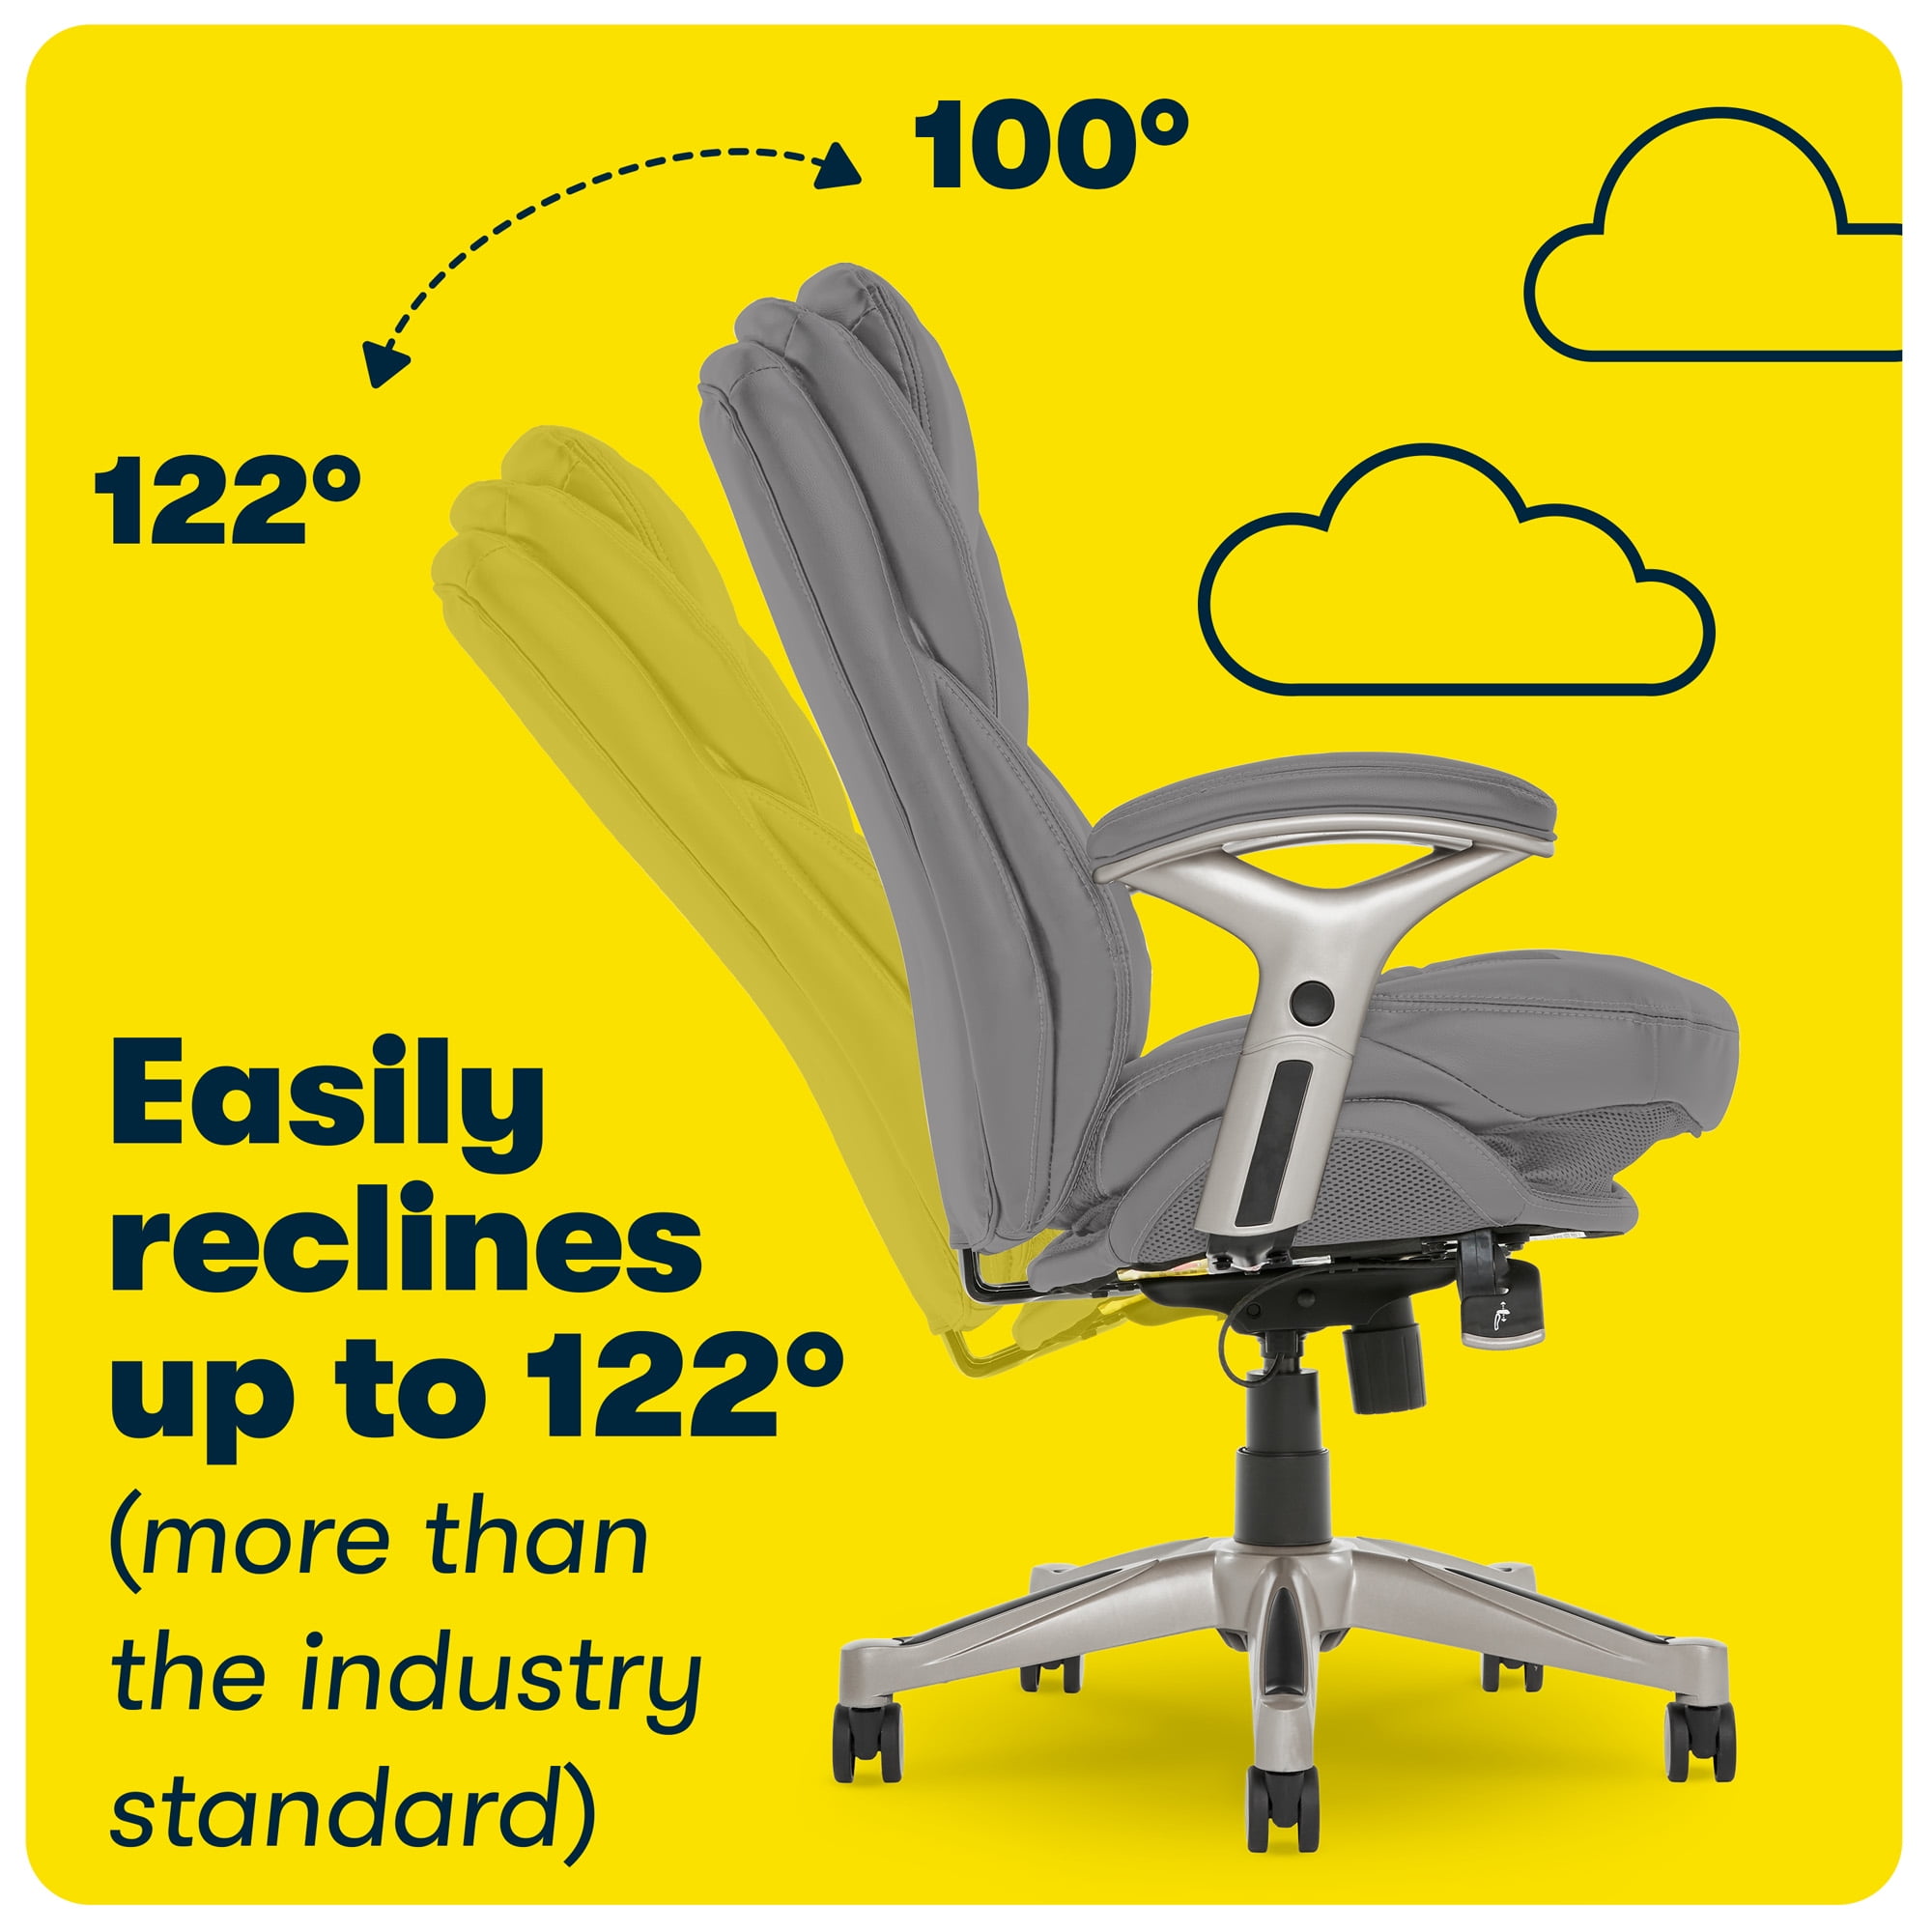 The Benefits of a Good Office Chair - Burketts Office Products